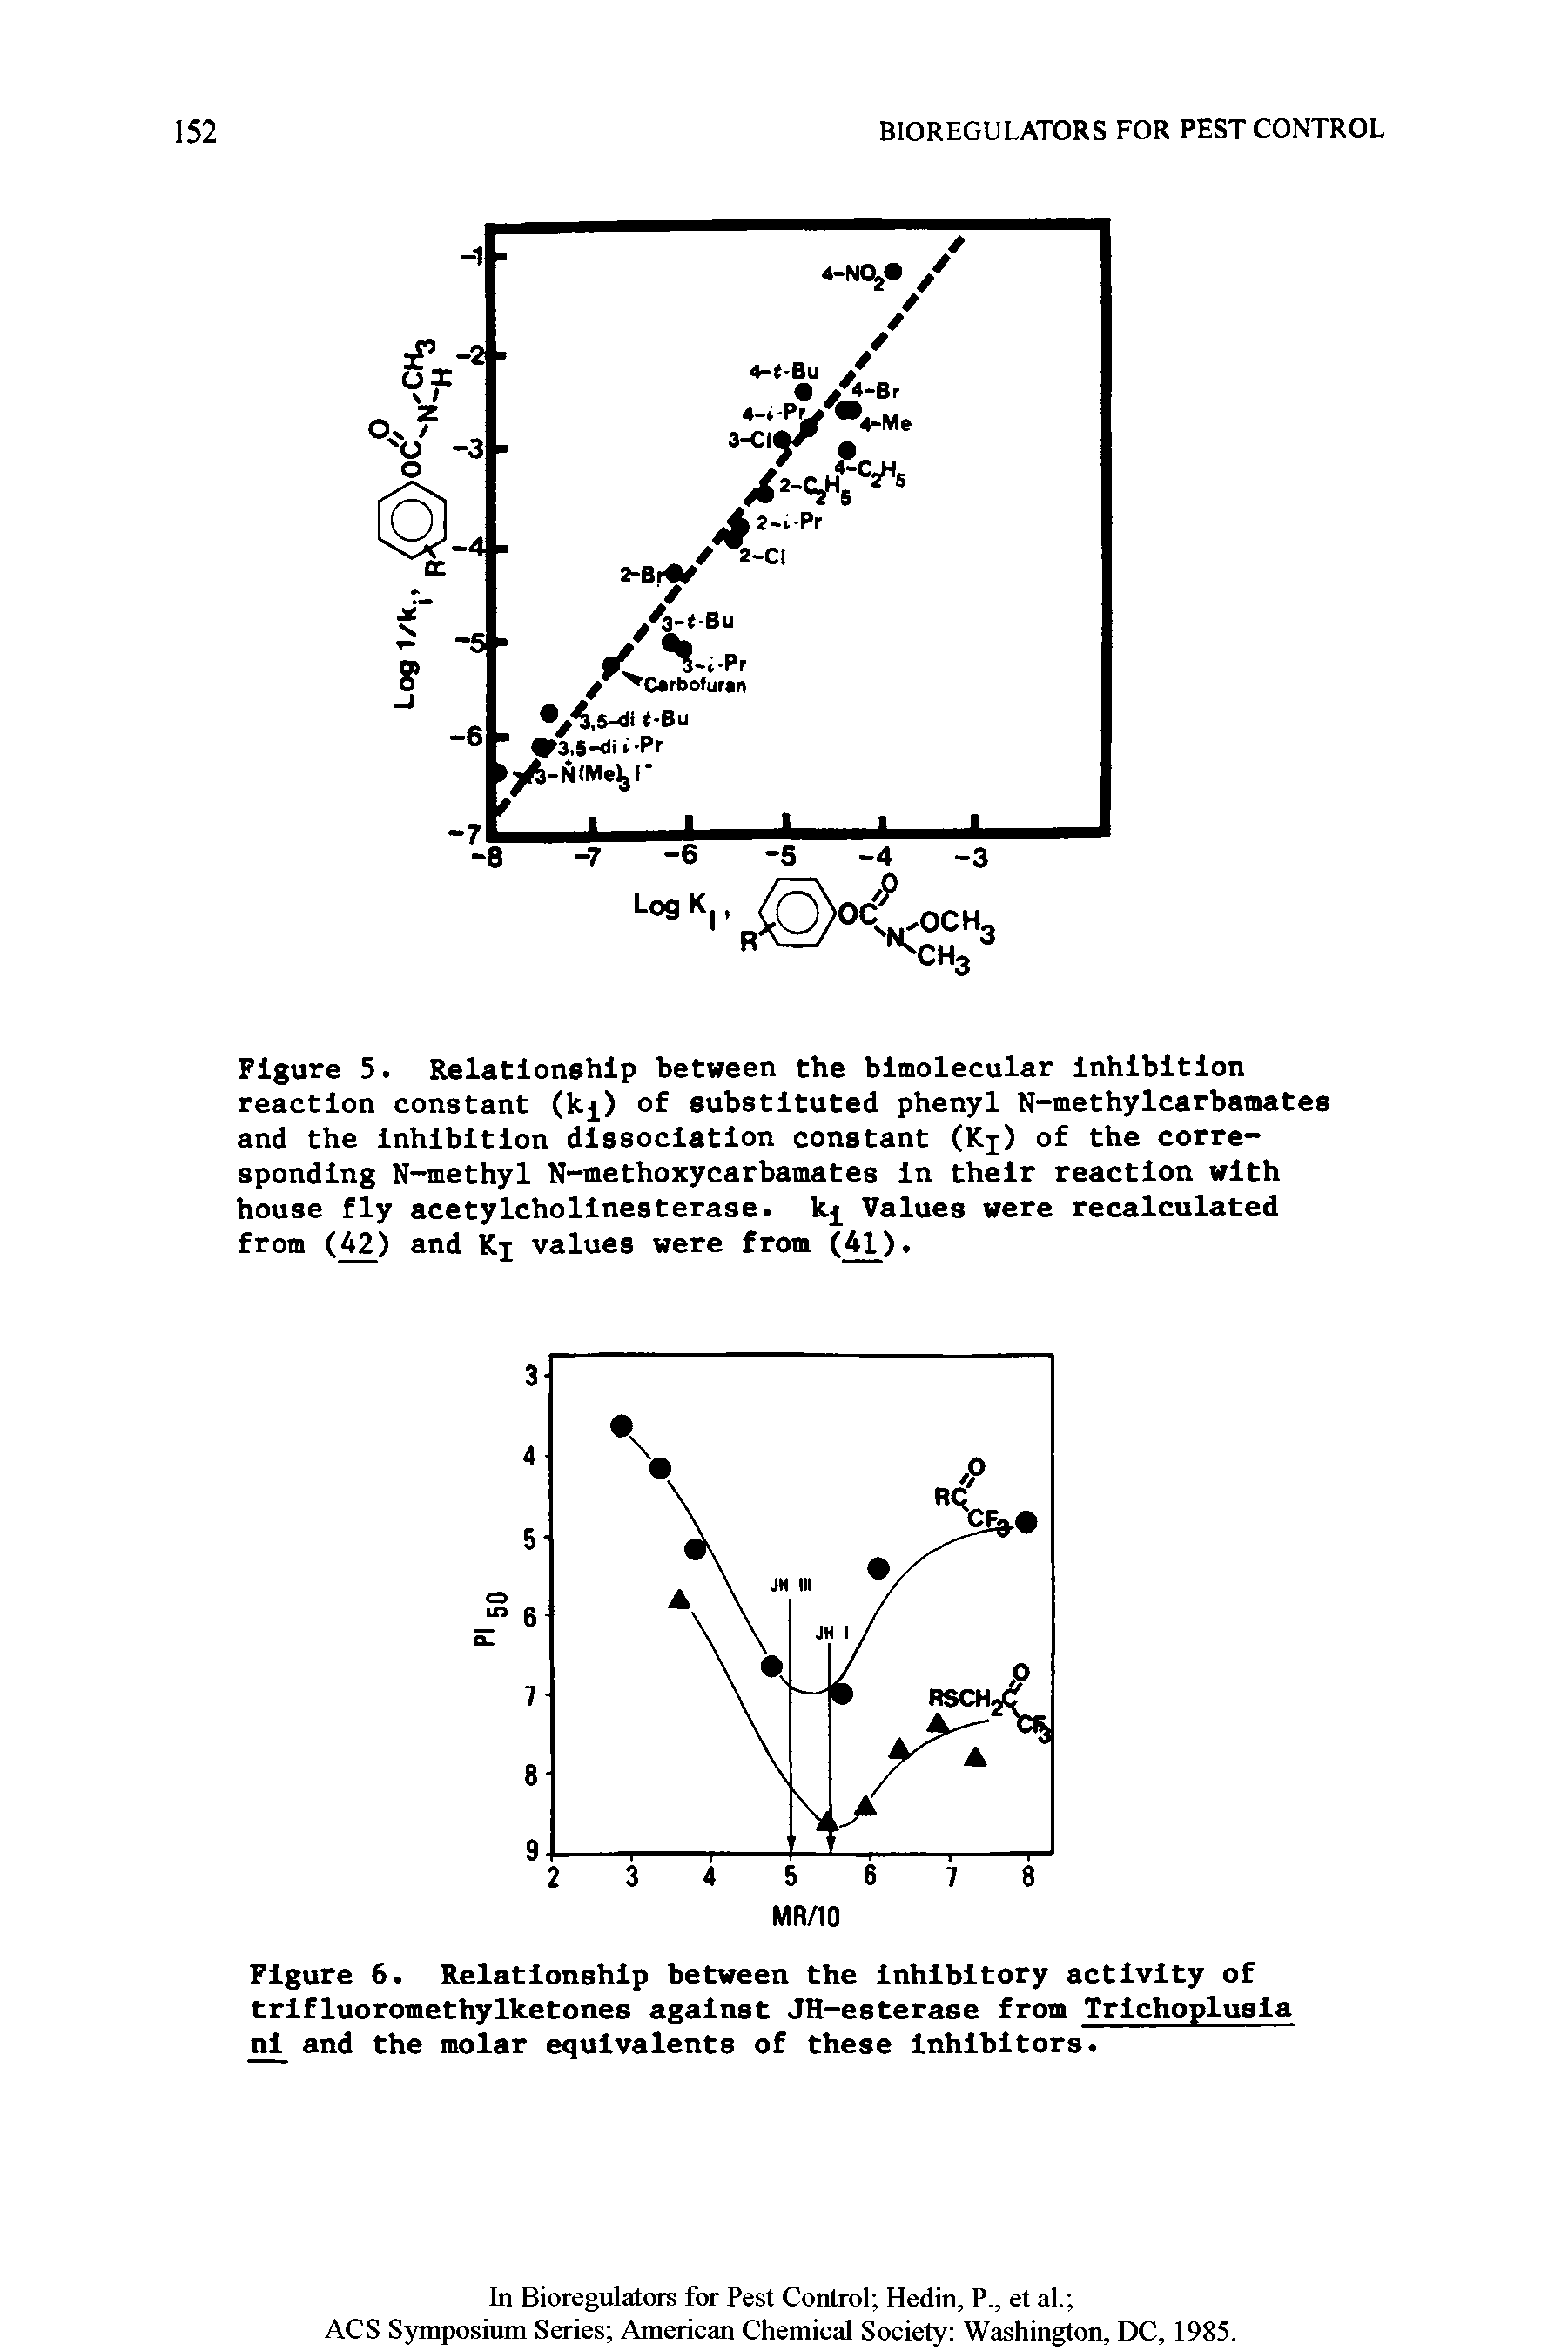 Figure 5. Relationship between the bimolecular Inhibition reaction constant (kj) of substituted phenyl N-methylcarbamates and the inhibition dissociation constant (Kj) of the corresponding N-methyl N-methoxycarbamates in their reaction with house fly acetylcholinesterase, k Values were recalculated from (42) and Kj values were from (41).